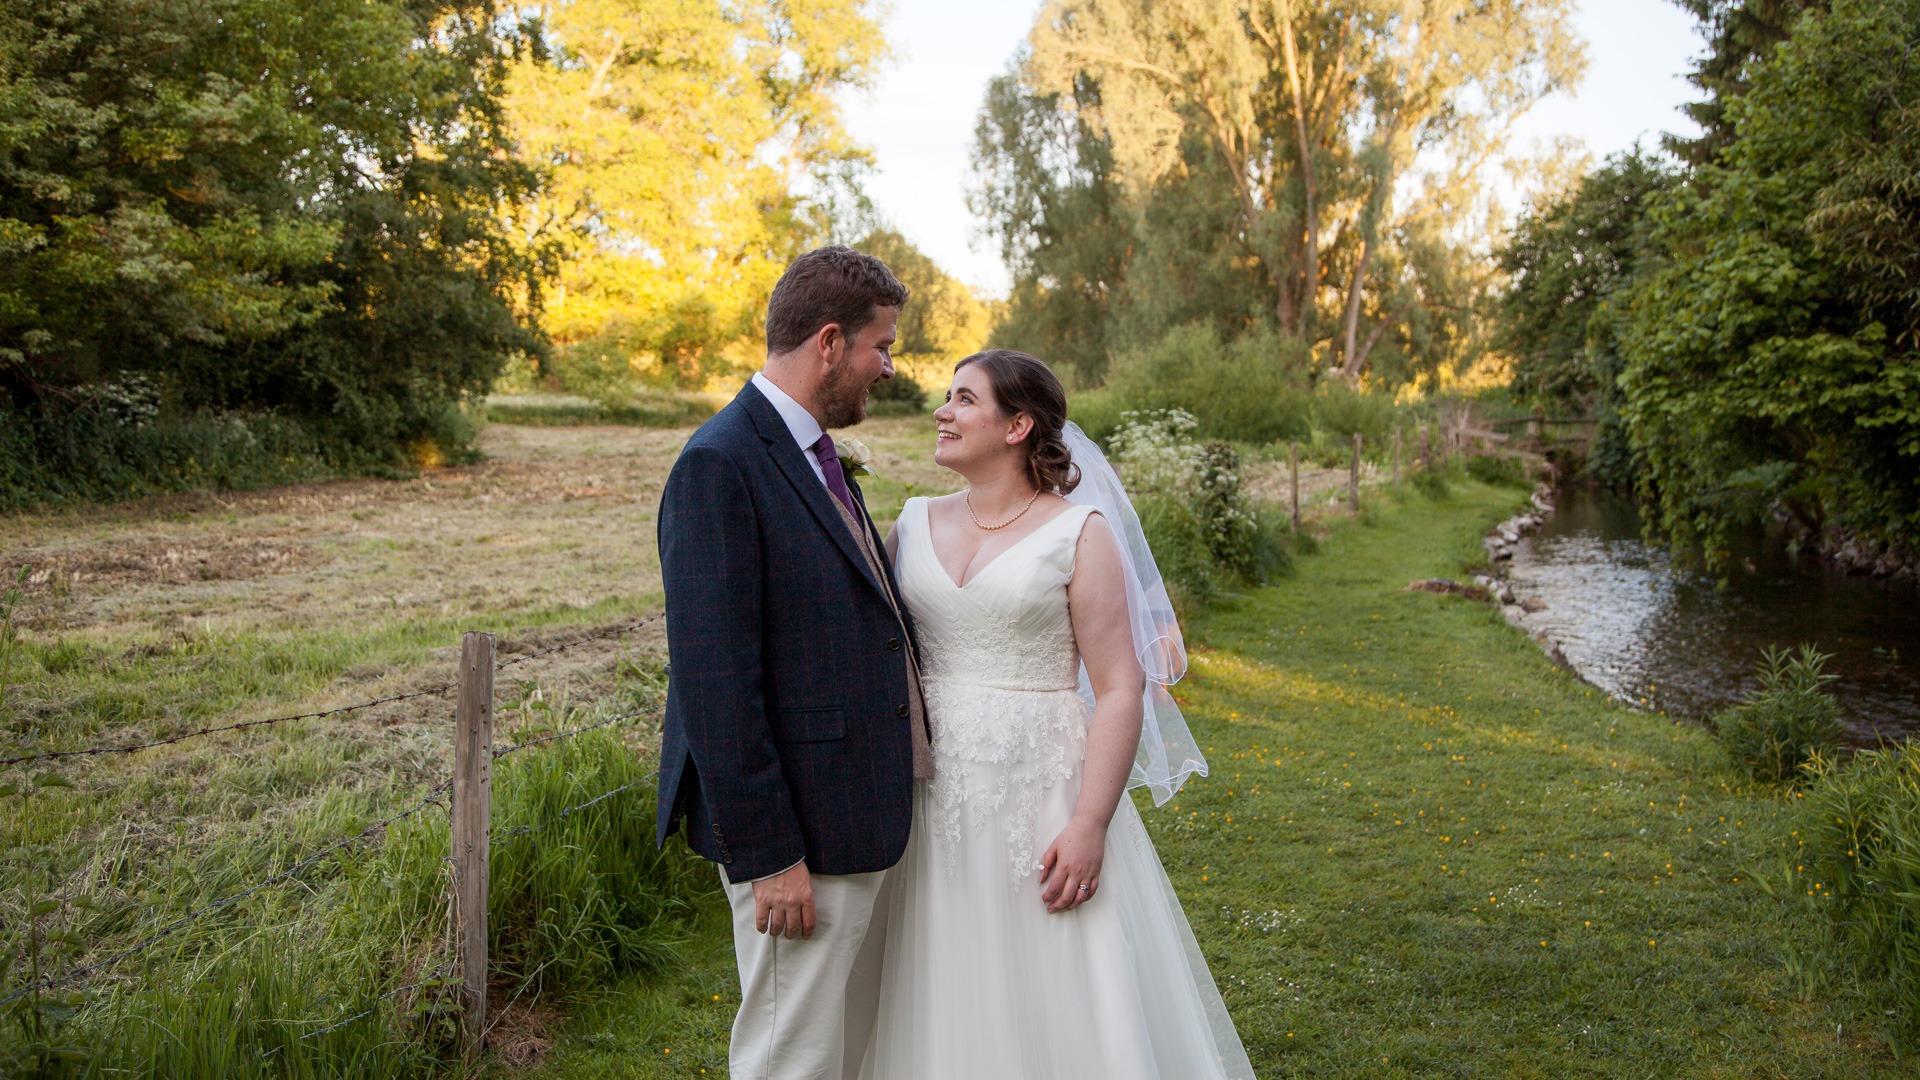 Classic English country church wedding for Jen and Stewart